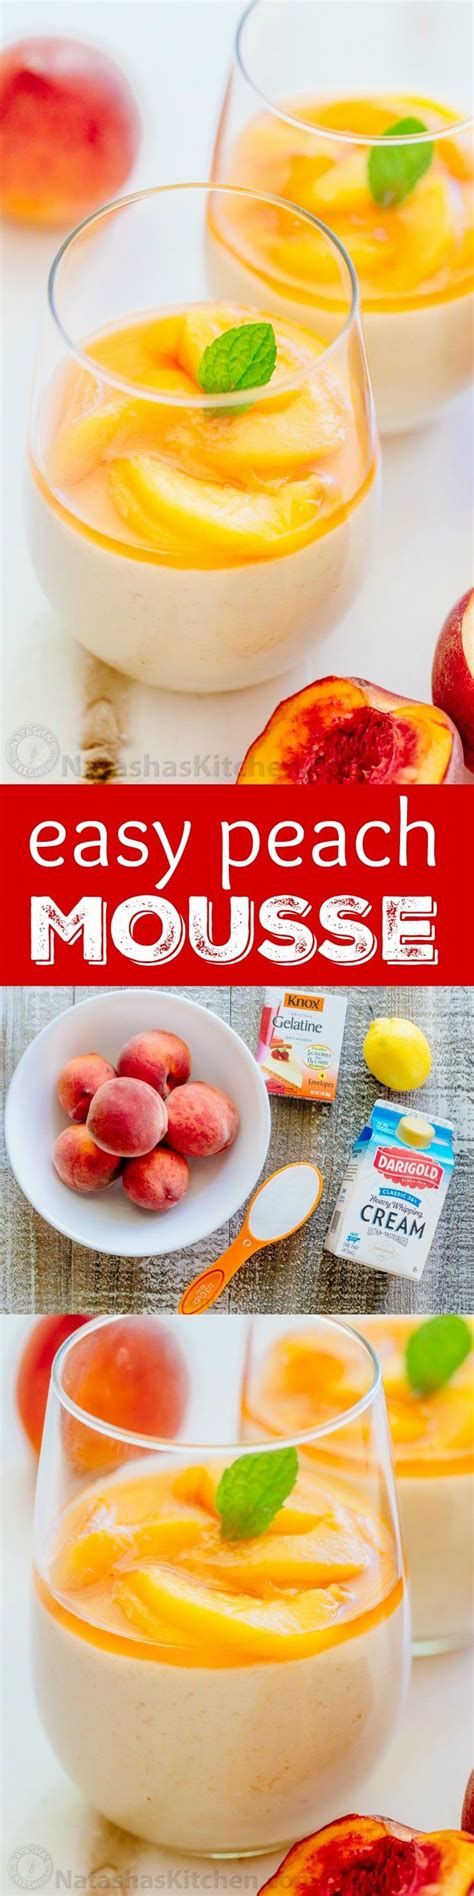 This Peach Mousse Is Loaded With Fresh Peaches More Than 1 Lb Goes